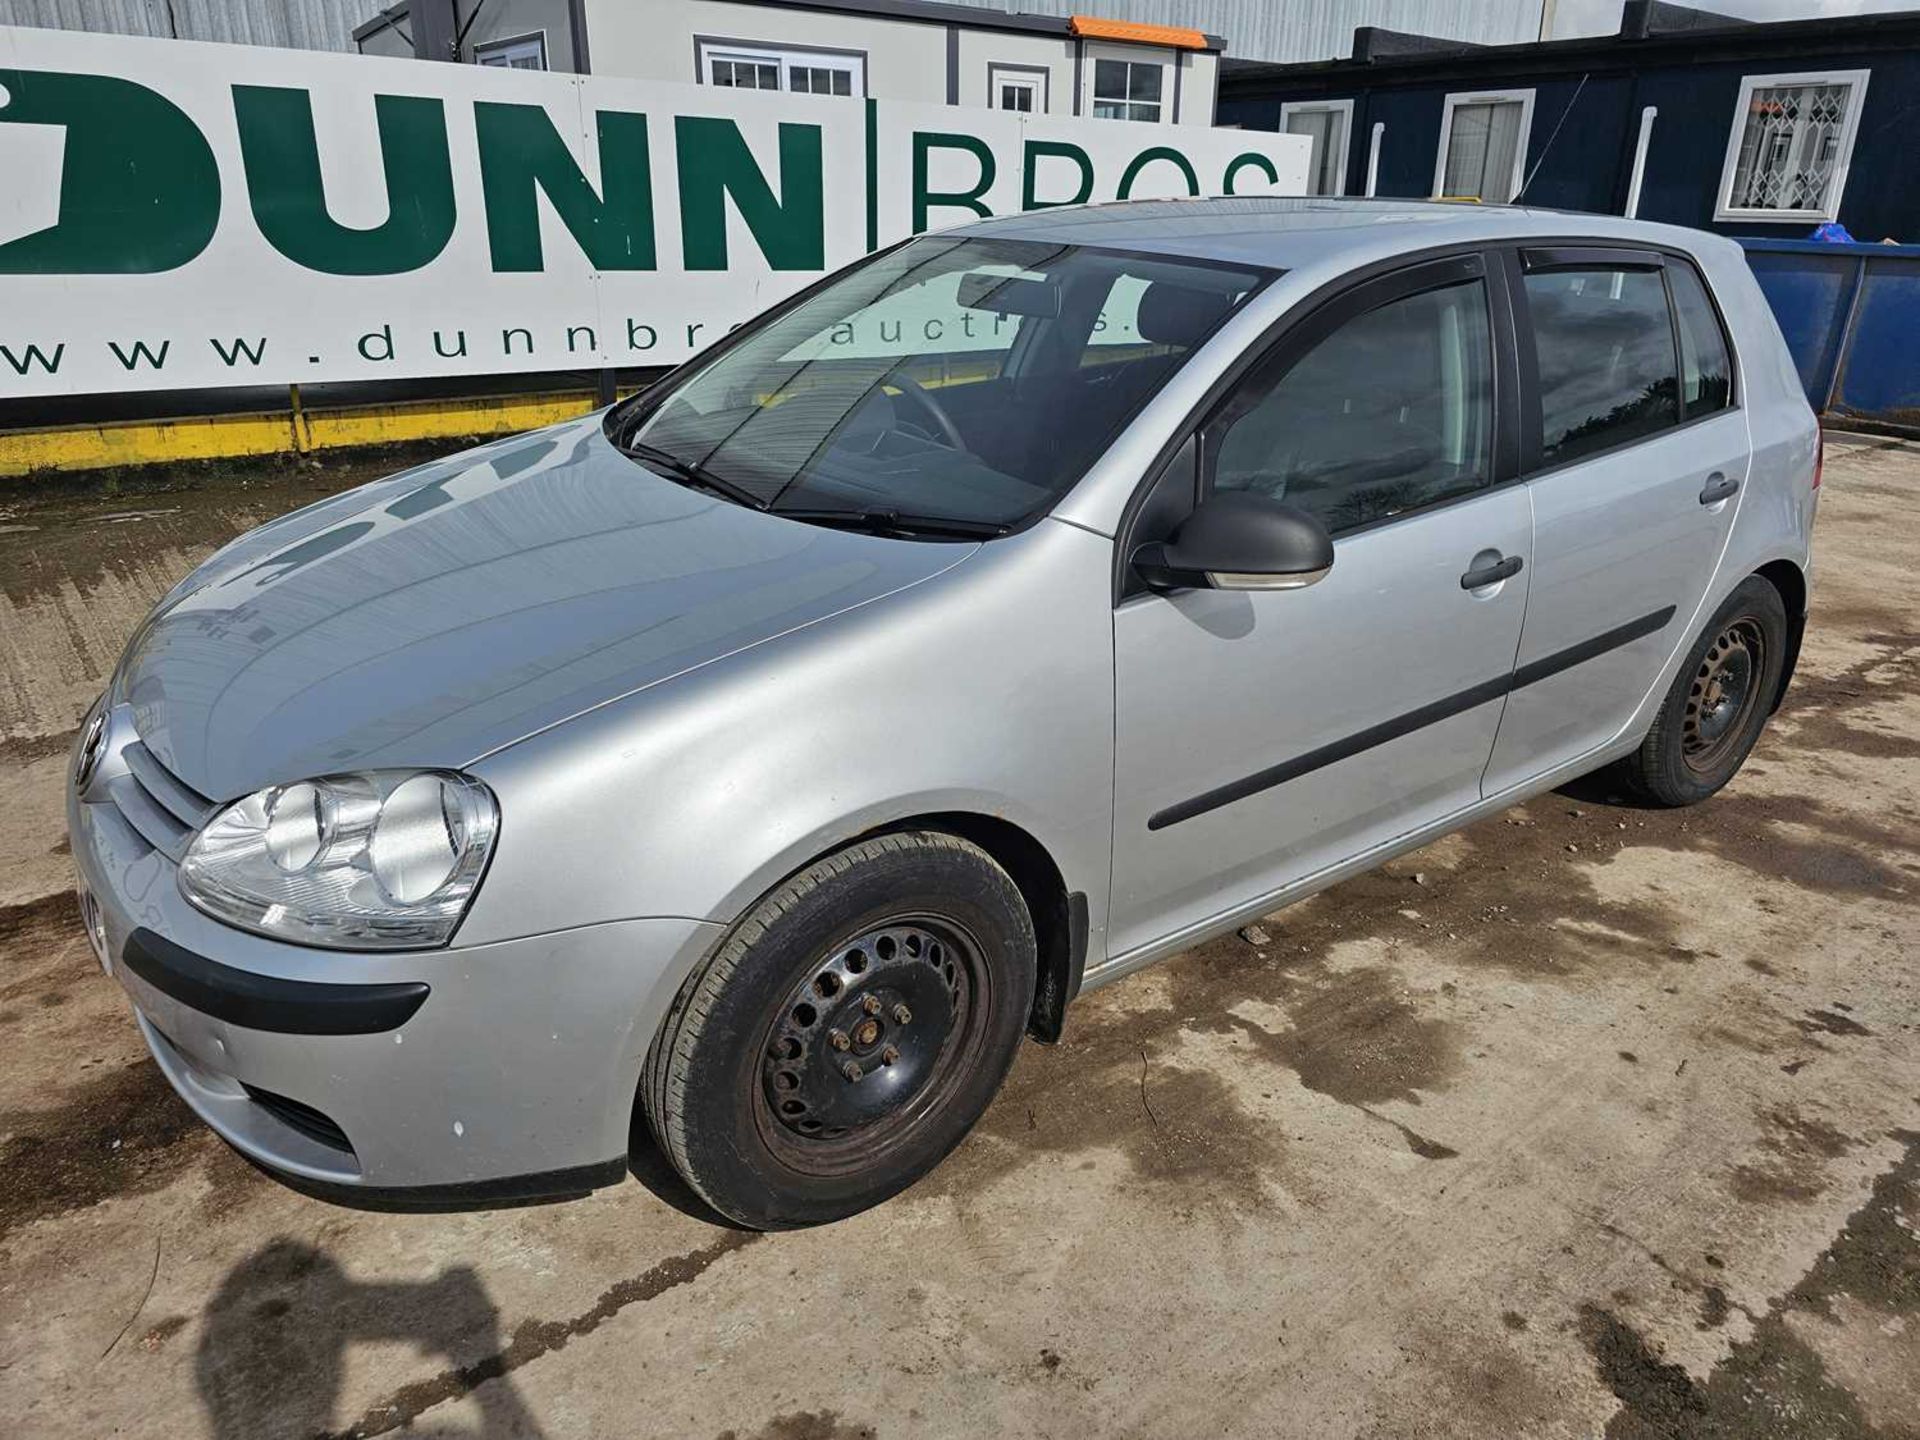 2008 Volkswagen Golf S 80, Full Leather, 5 Speed, A/C (Reg. Docs. & Service History Available)